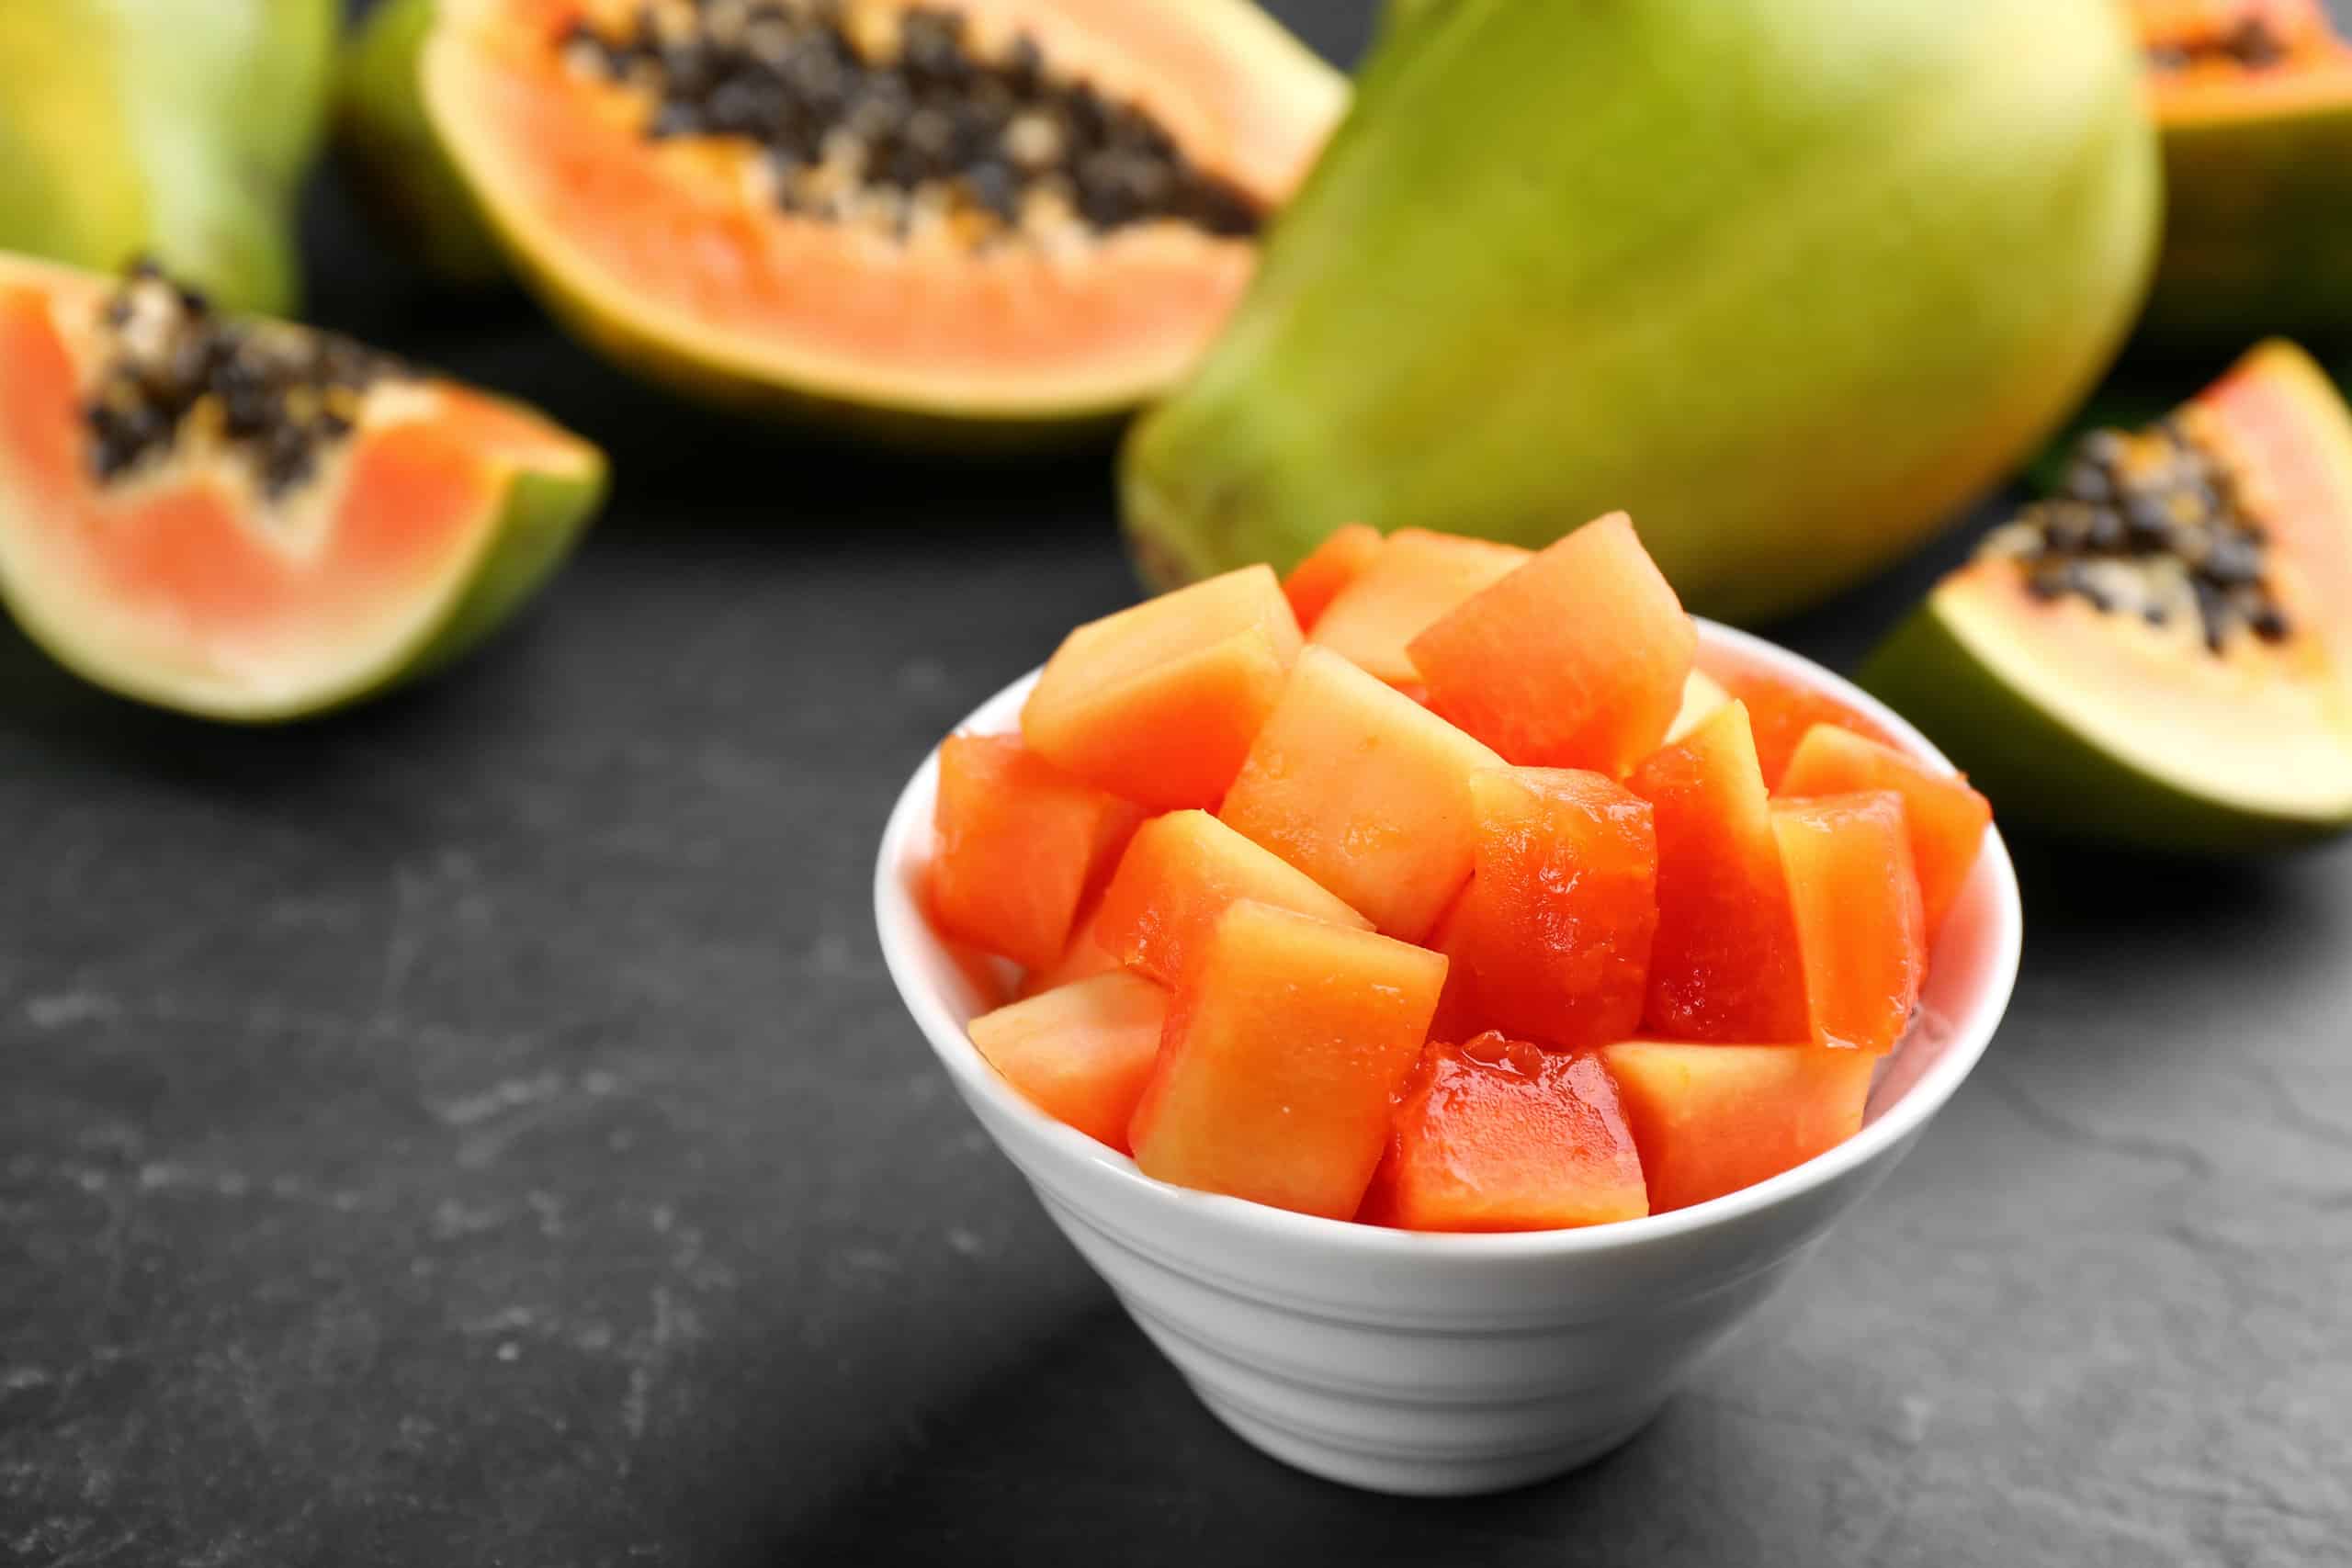 Diced papaya in a white bowl with whole and half papaya behind it on a black table